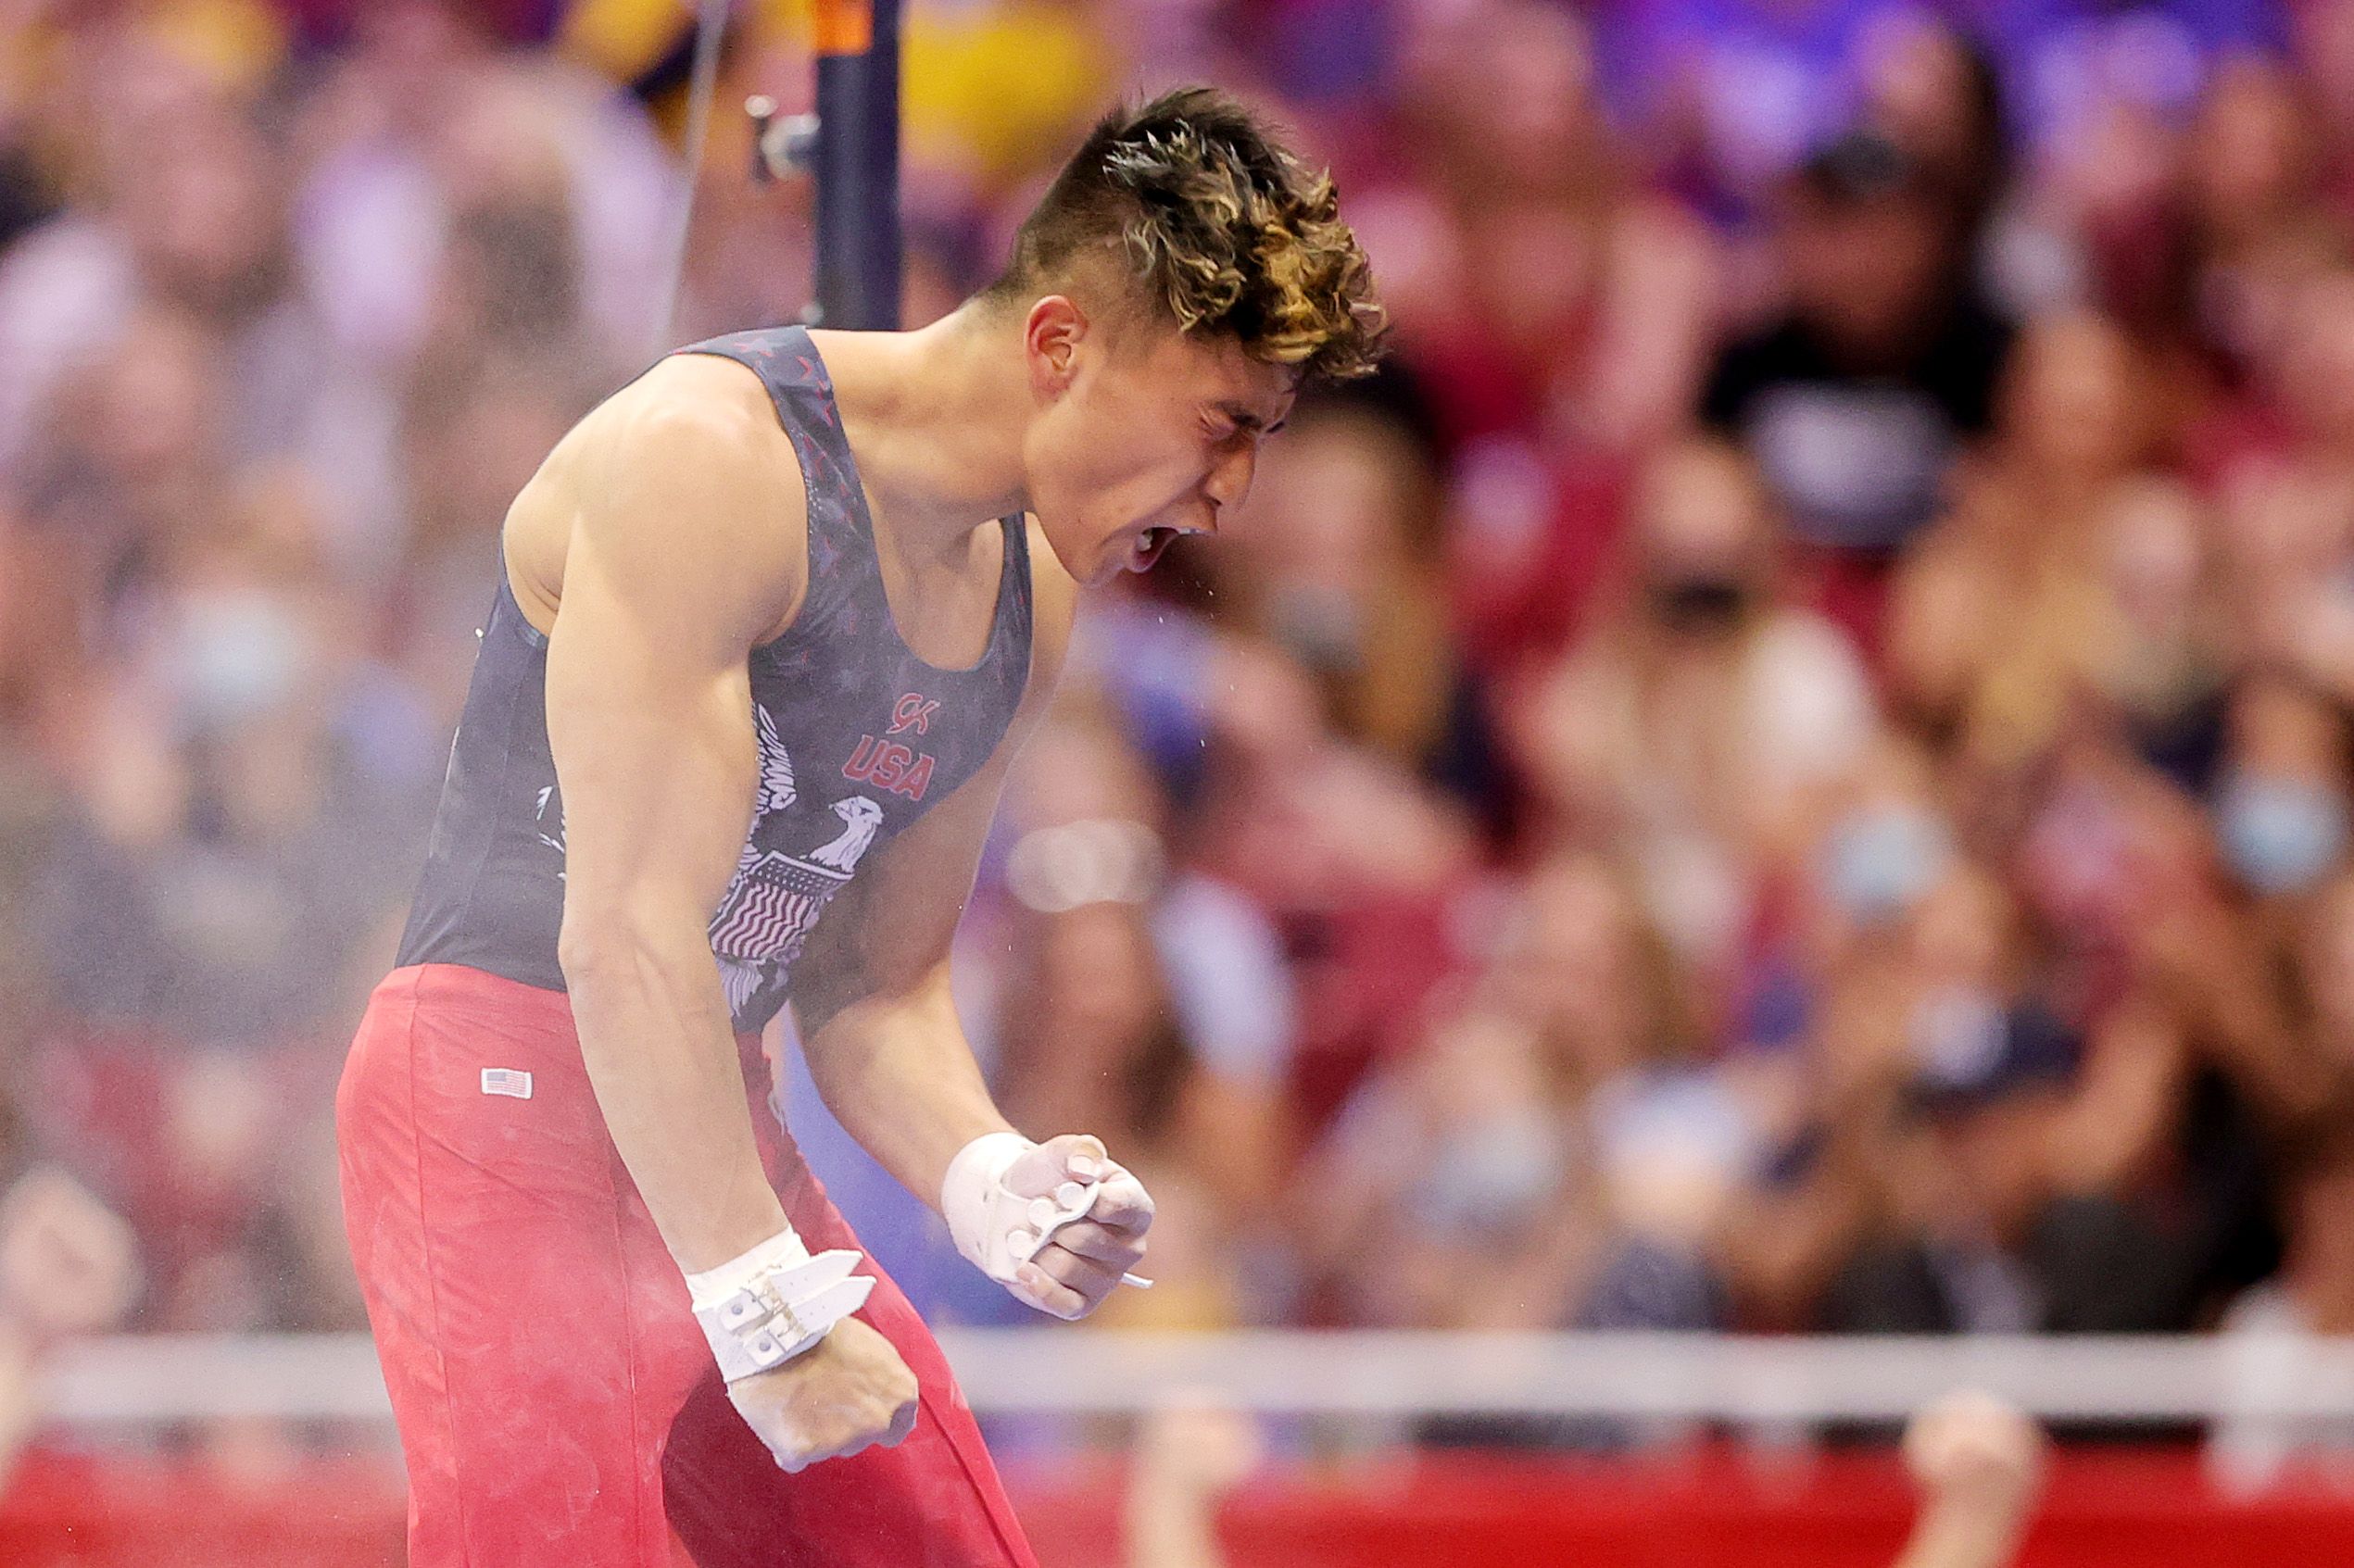 Yul Moldauer reacts after competing on high bar during the Men's competition of the 2021 U.S. Gymnastics Olympic Trials at America’s Center in St Louis, Missouri. 